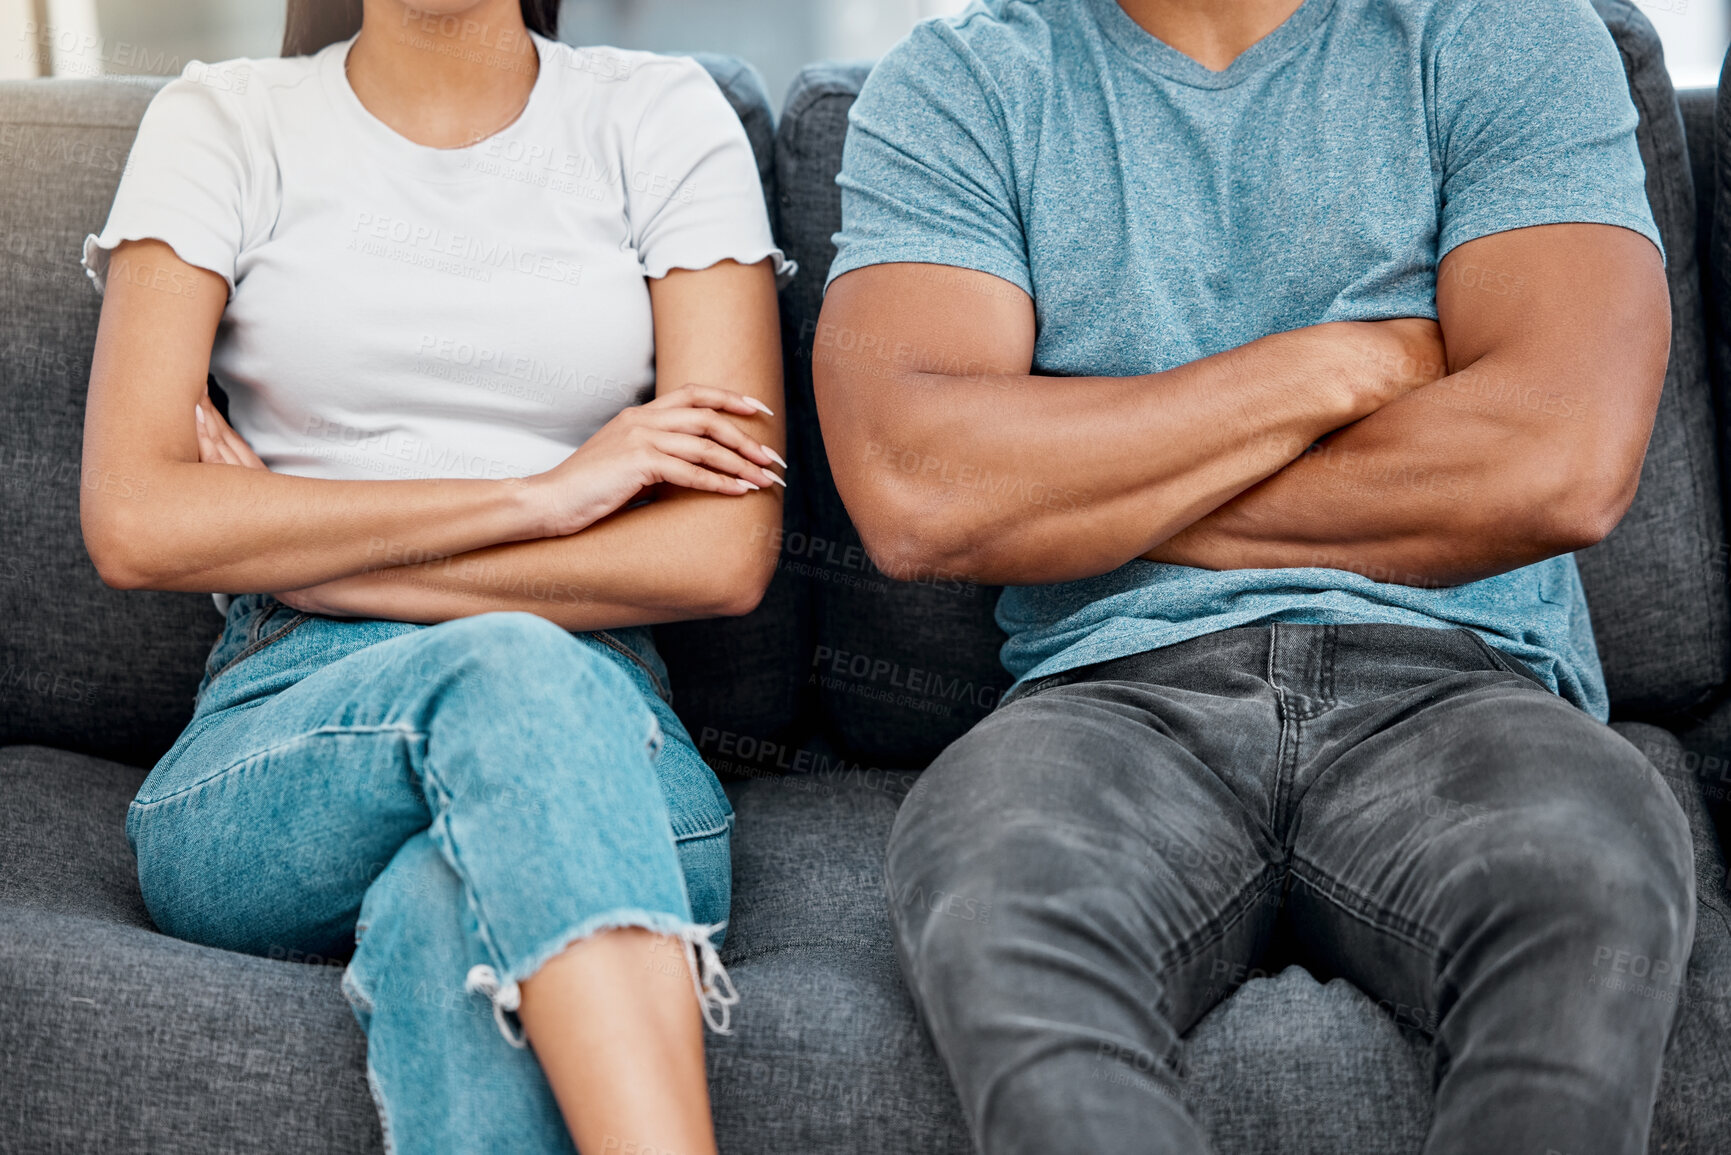 Buy stock photo Cropped shot of an unrecognisable couple sitting on the sofa with their arms crossed after a fight